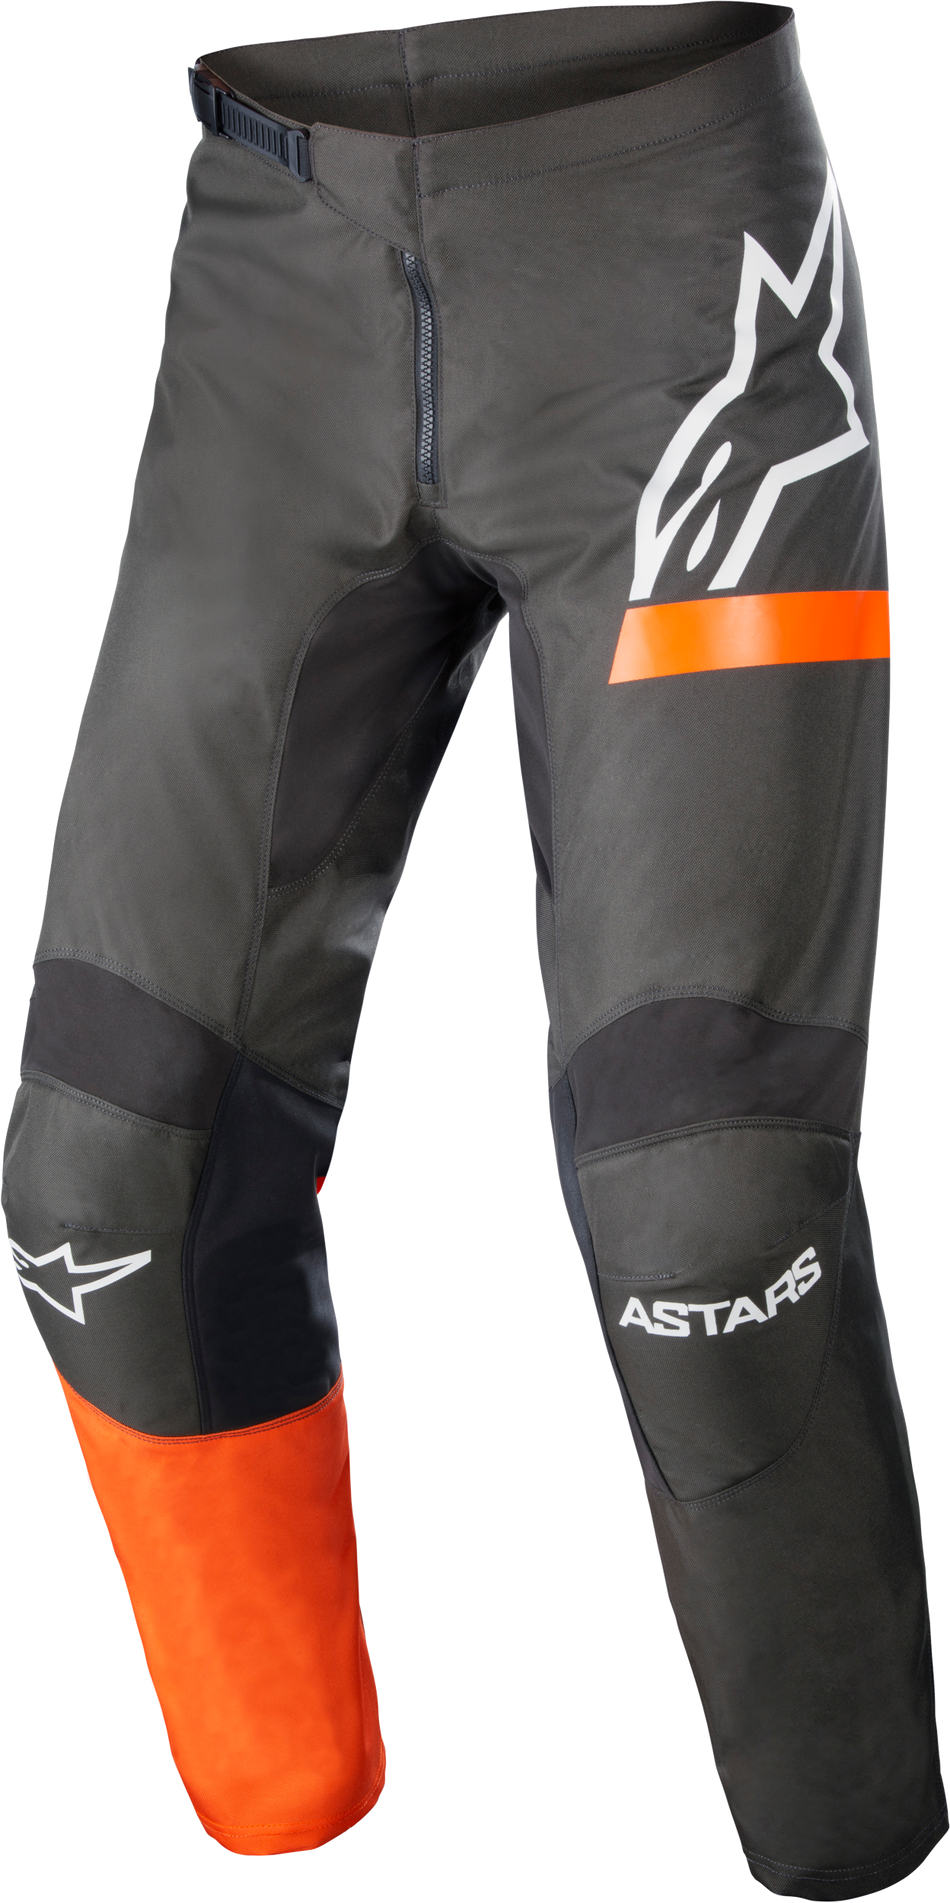 ALPINESTARS Fluid Chaser Pants Anthracite/Coral Fluo Sz 30 3722422-1794-30